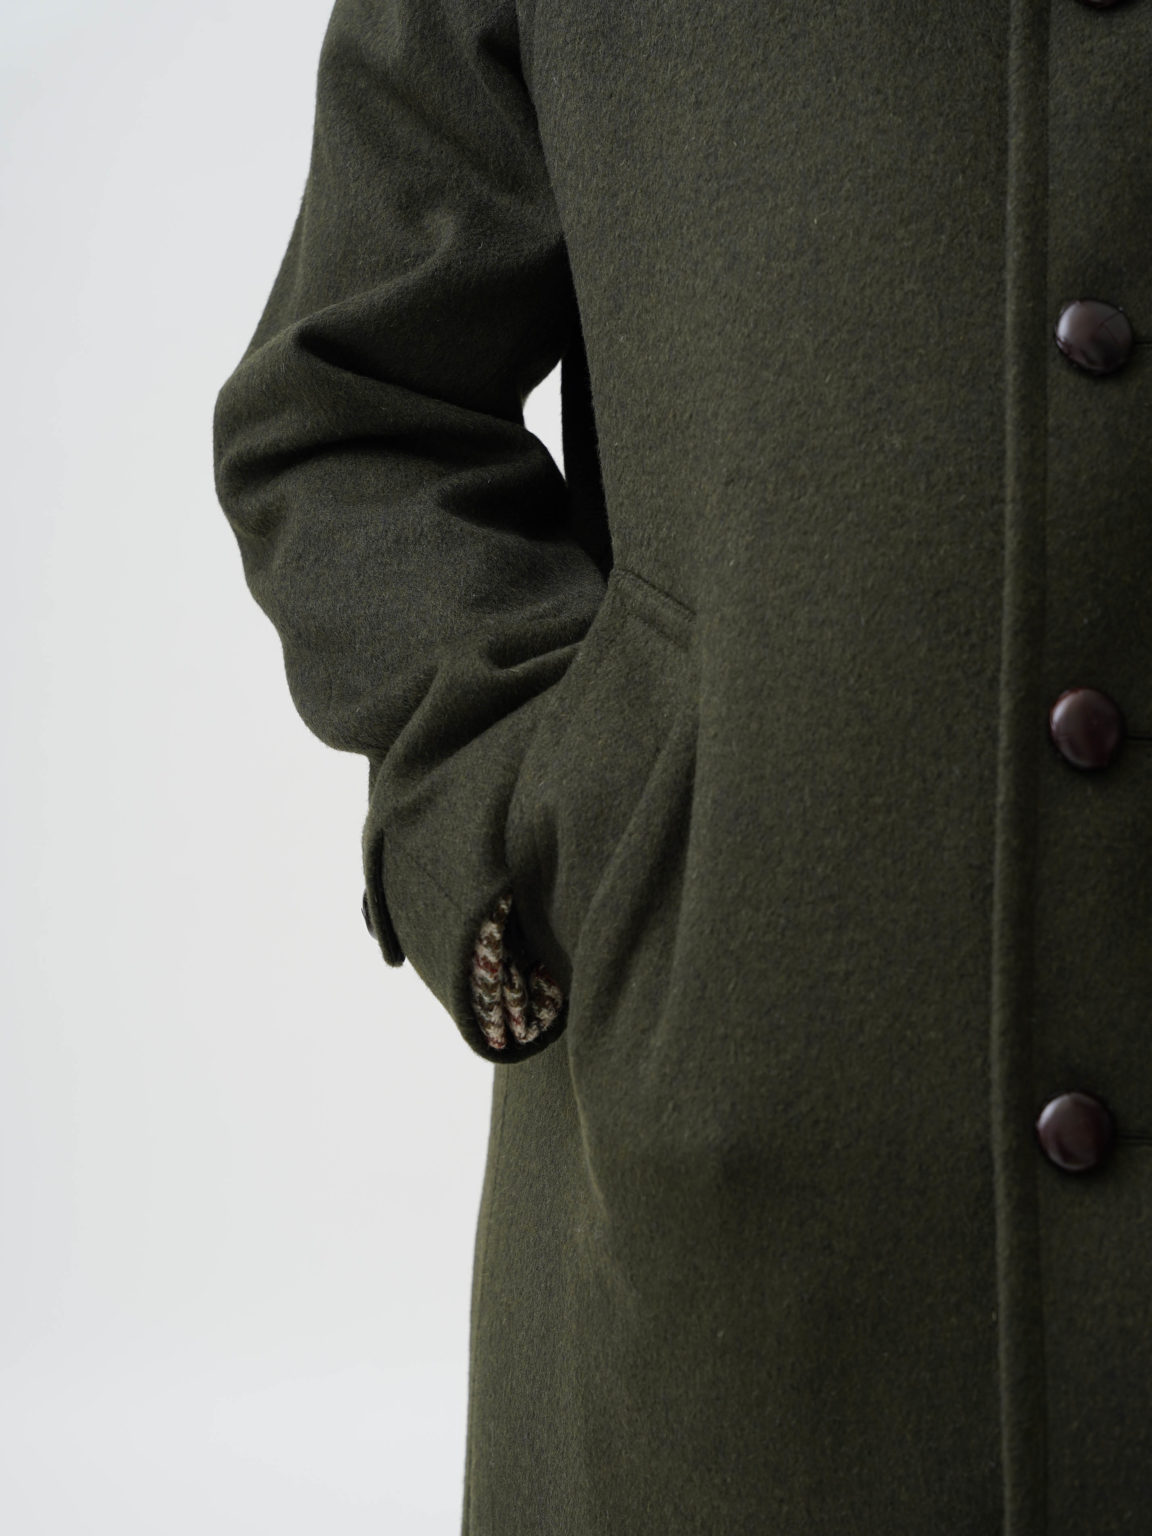 SINGLE-BREASTED COAT IN WOOL BROADCLOTH - LODEN GREEN | HUSBANDS